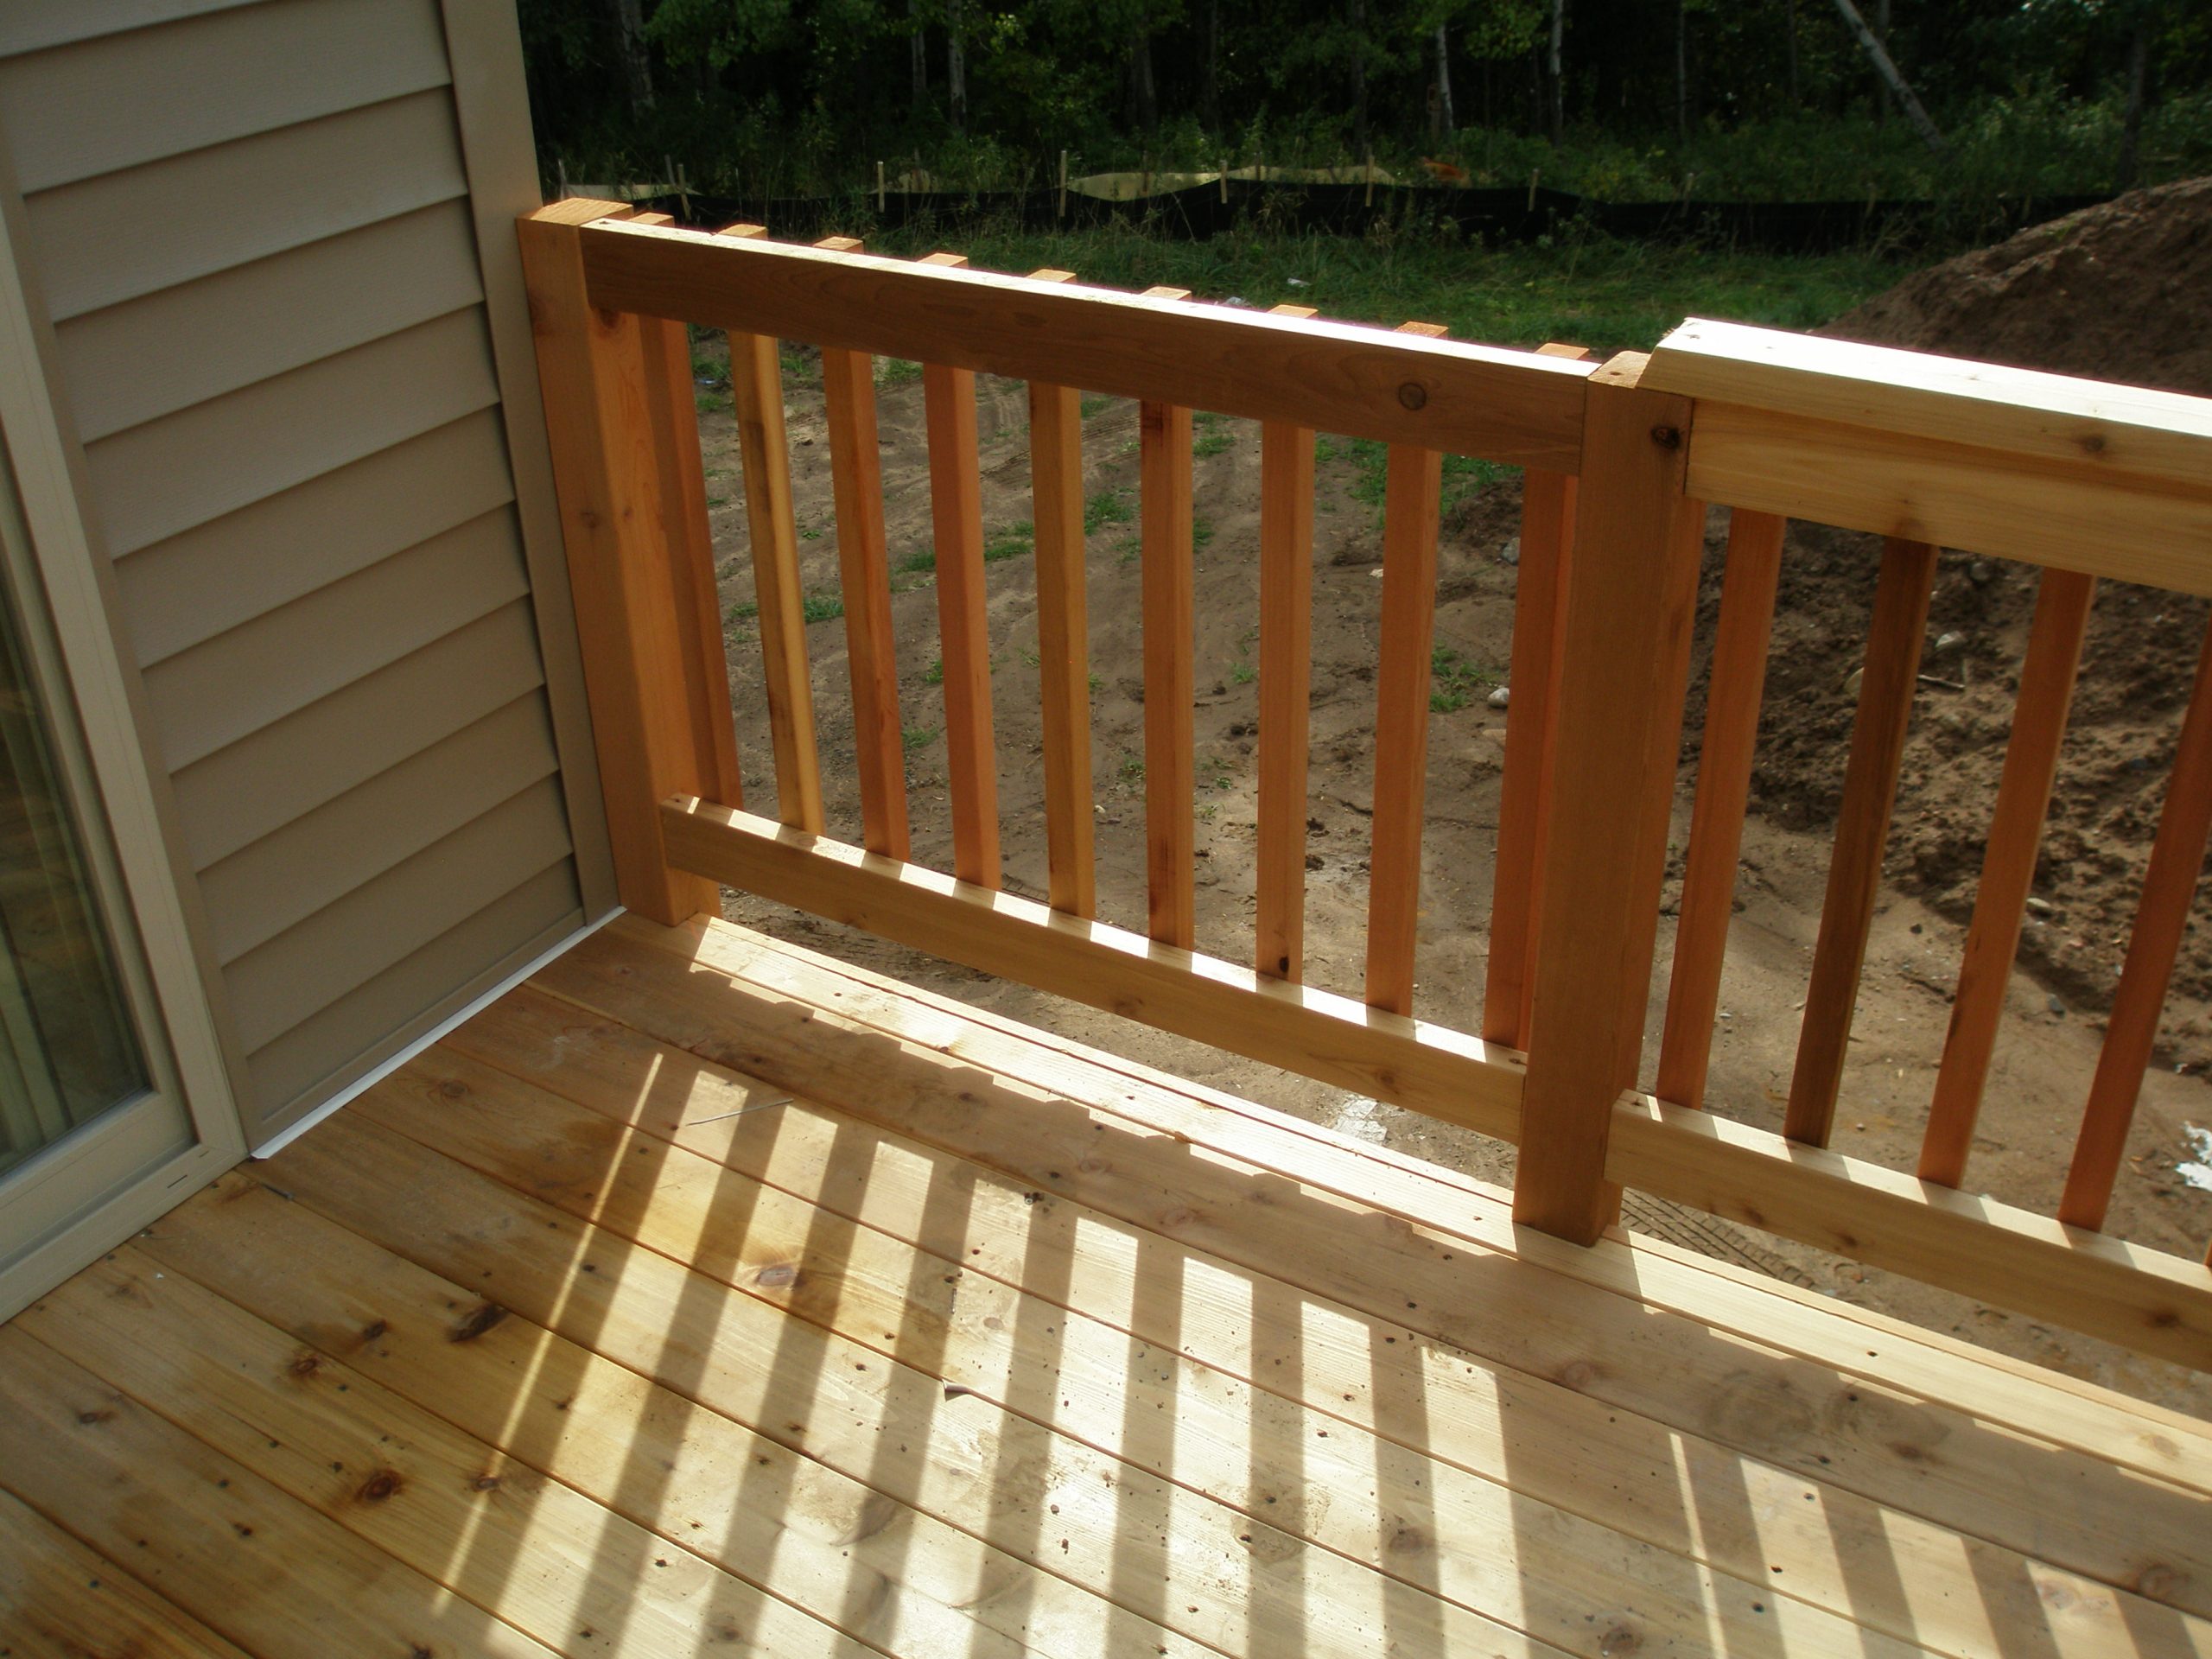 BCD303A – Residential Wood Deck Design ARTICLE